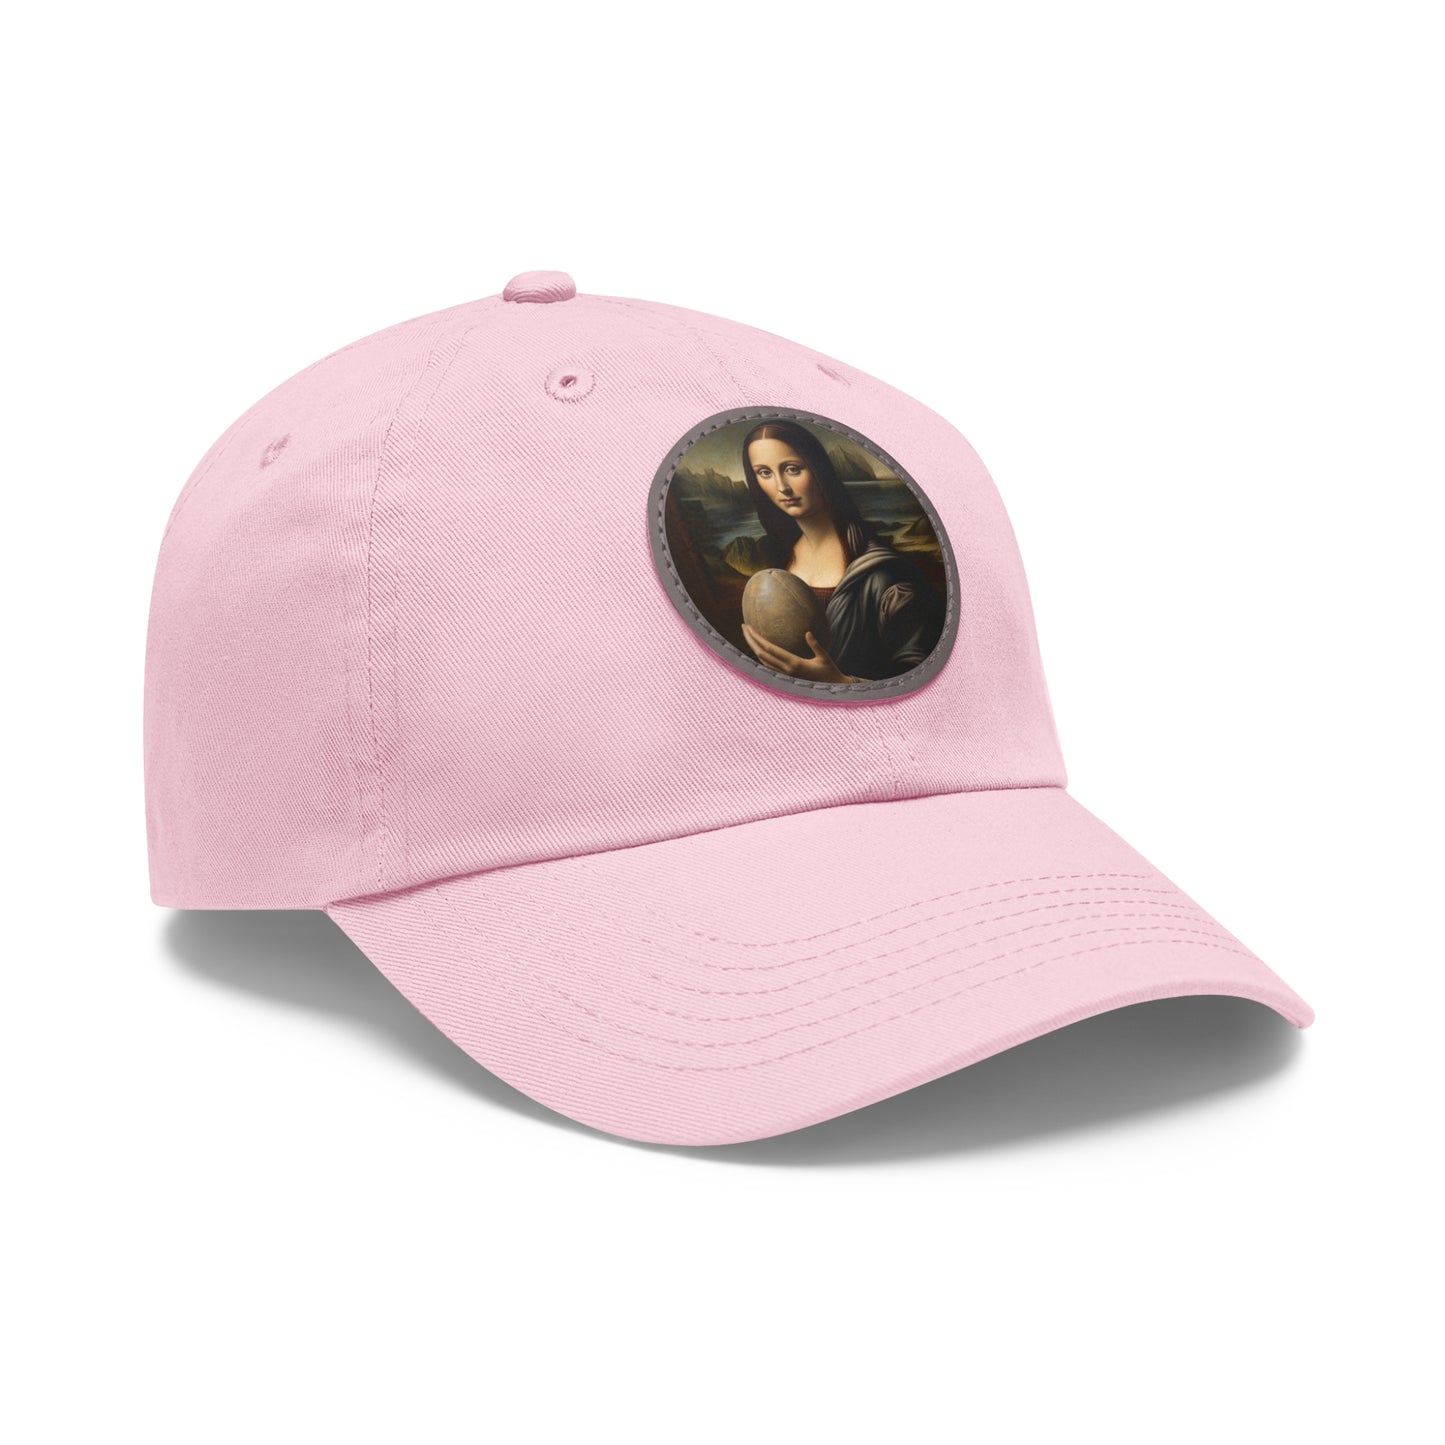 Mona Lisa Rugby hat